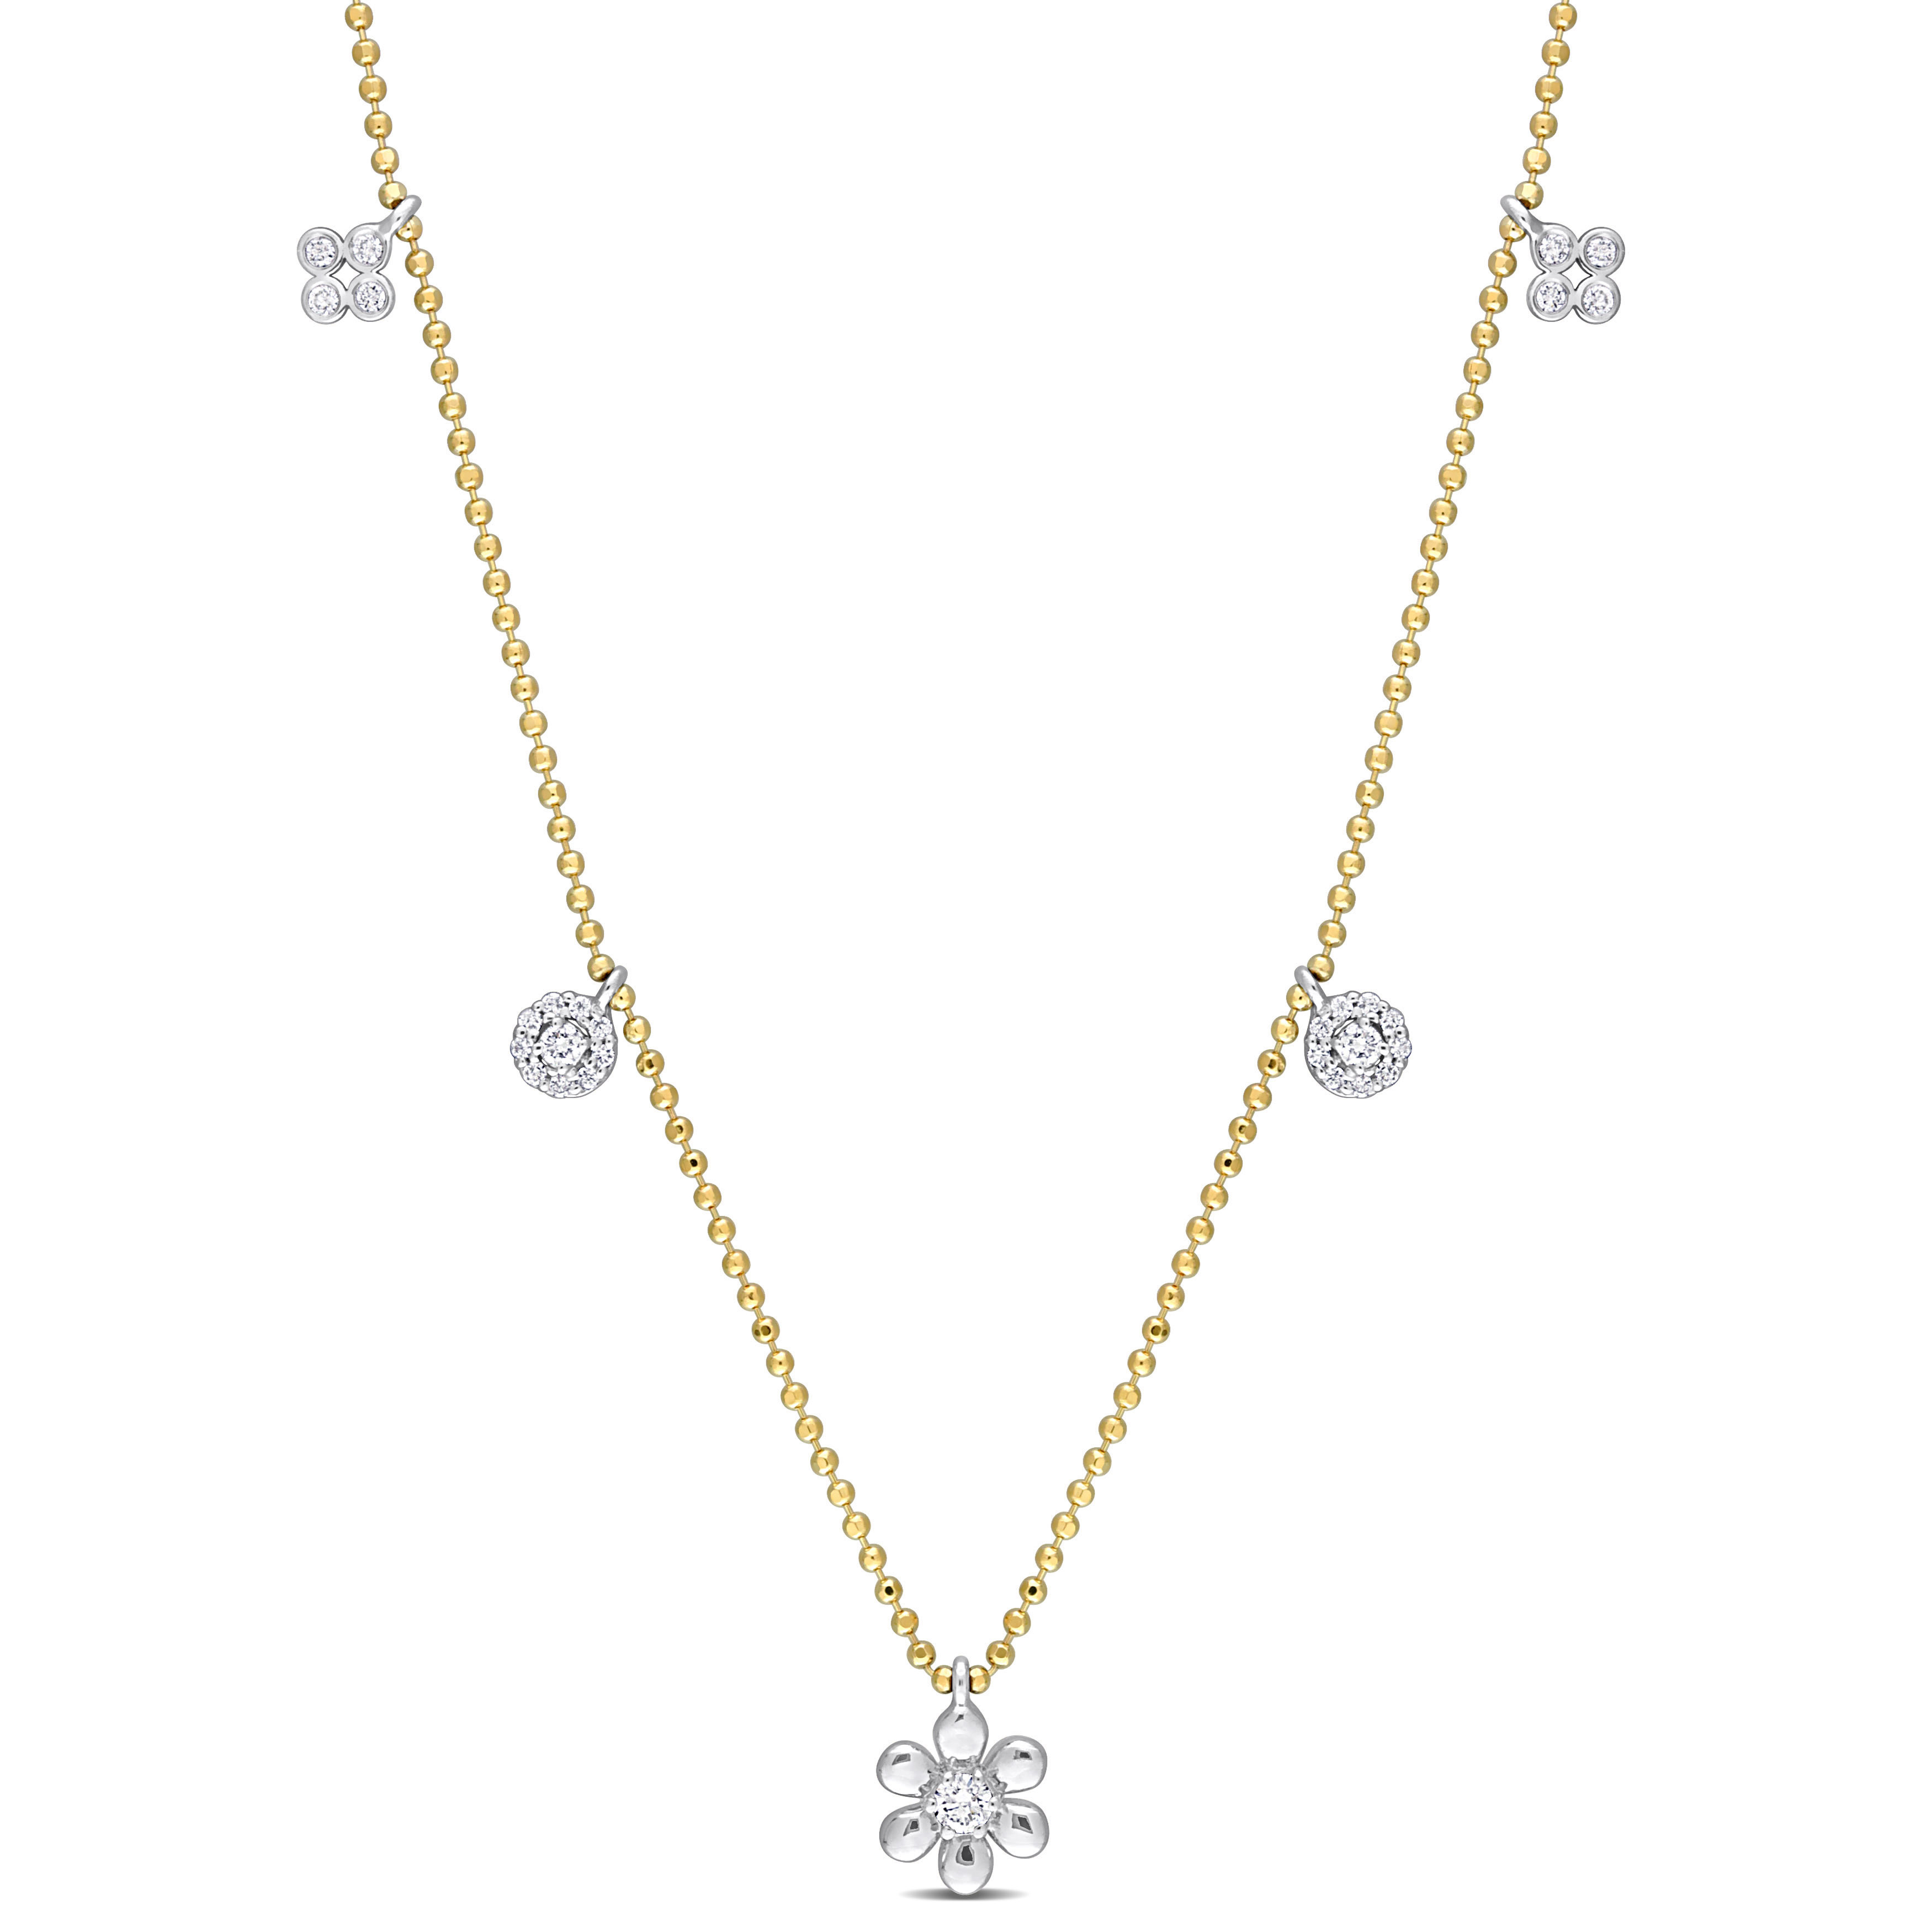 1/3 CT TDW Diamond Station Necklace in 14k Two-Tone Yellow and White Gold - 17 in.